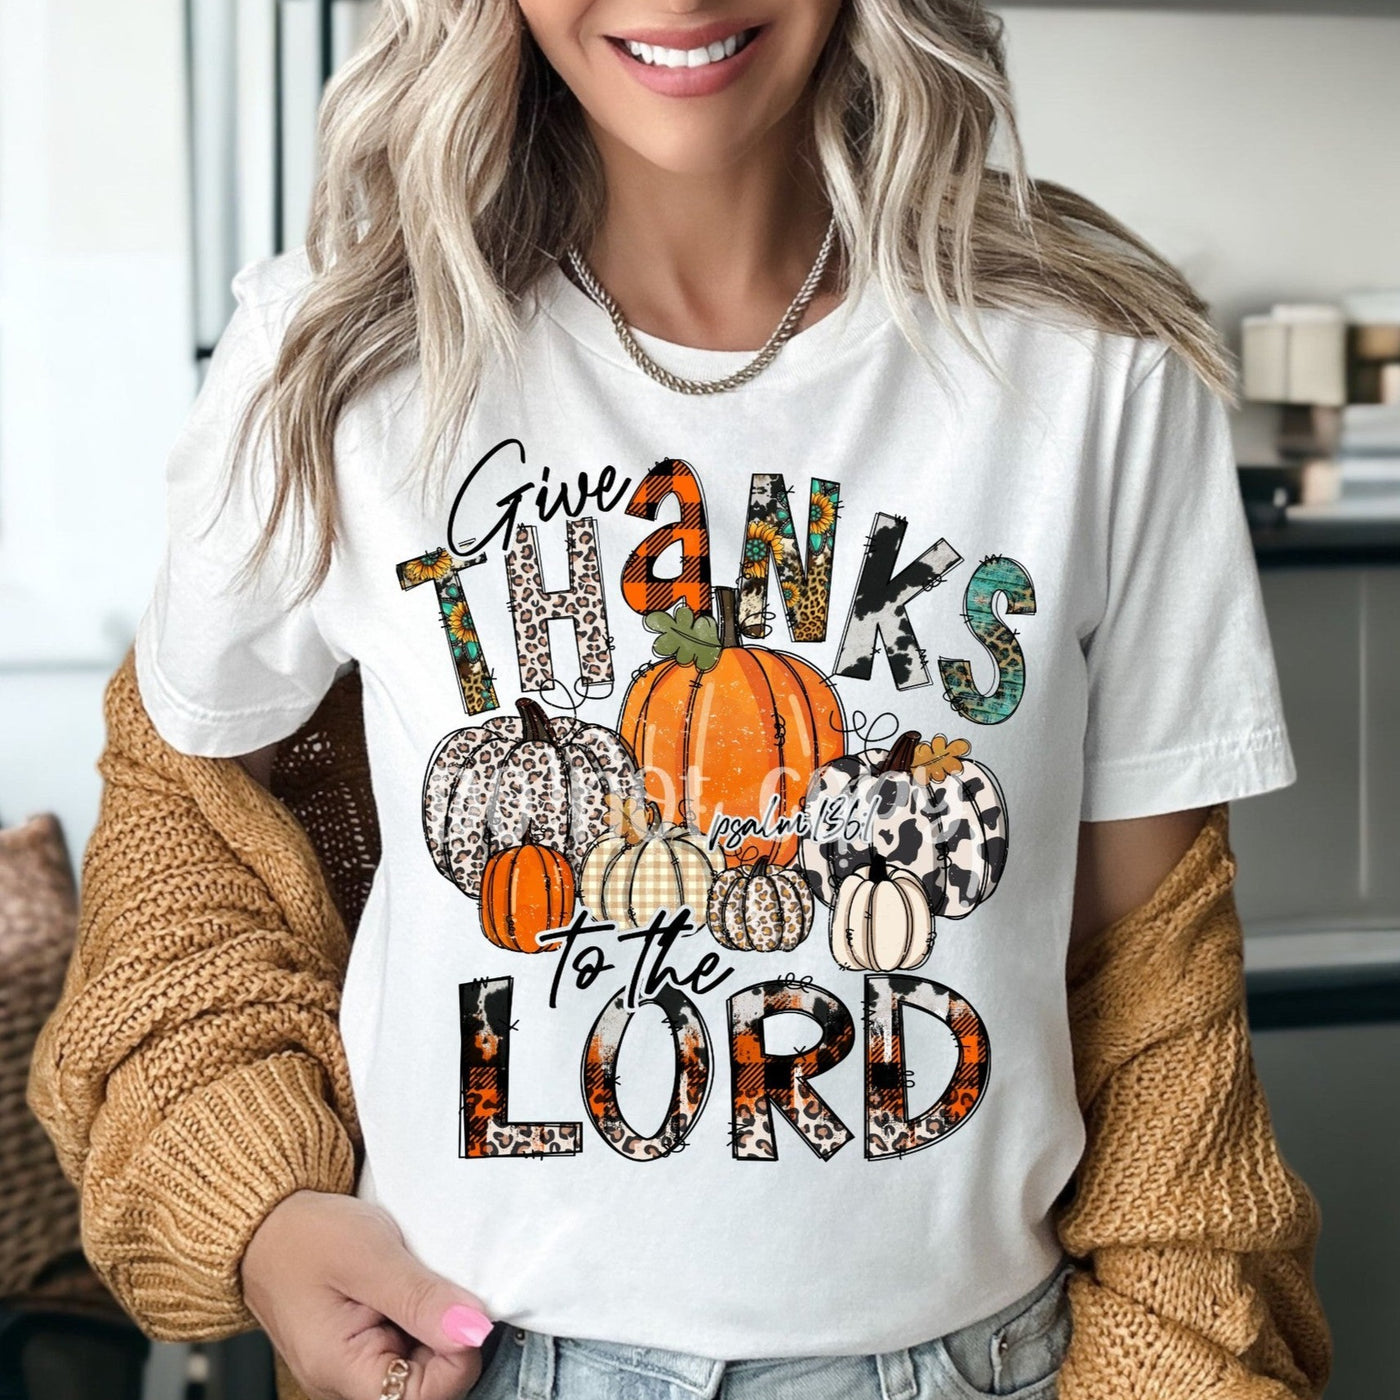 "Give Thanks to the Lord"  T-shirt (shown on "White")